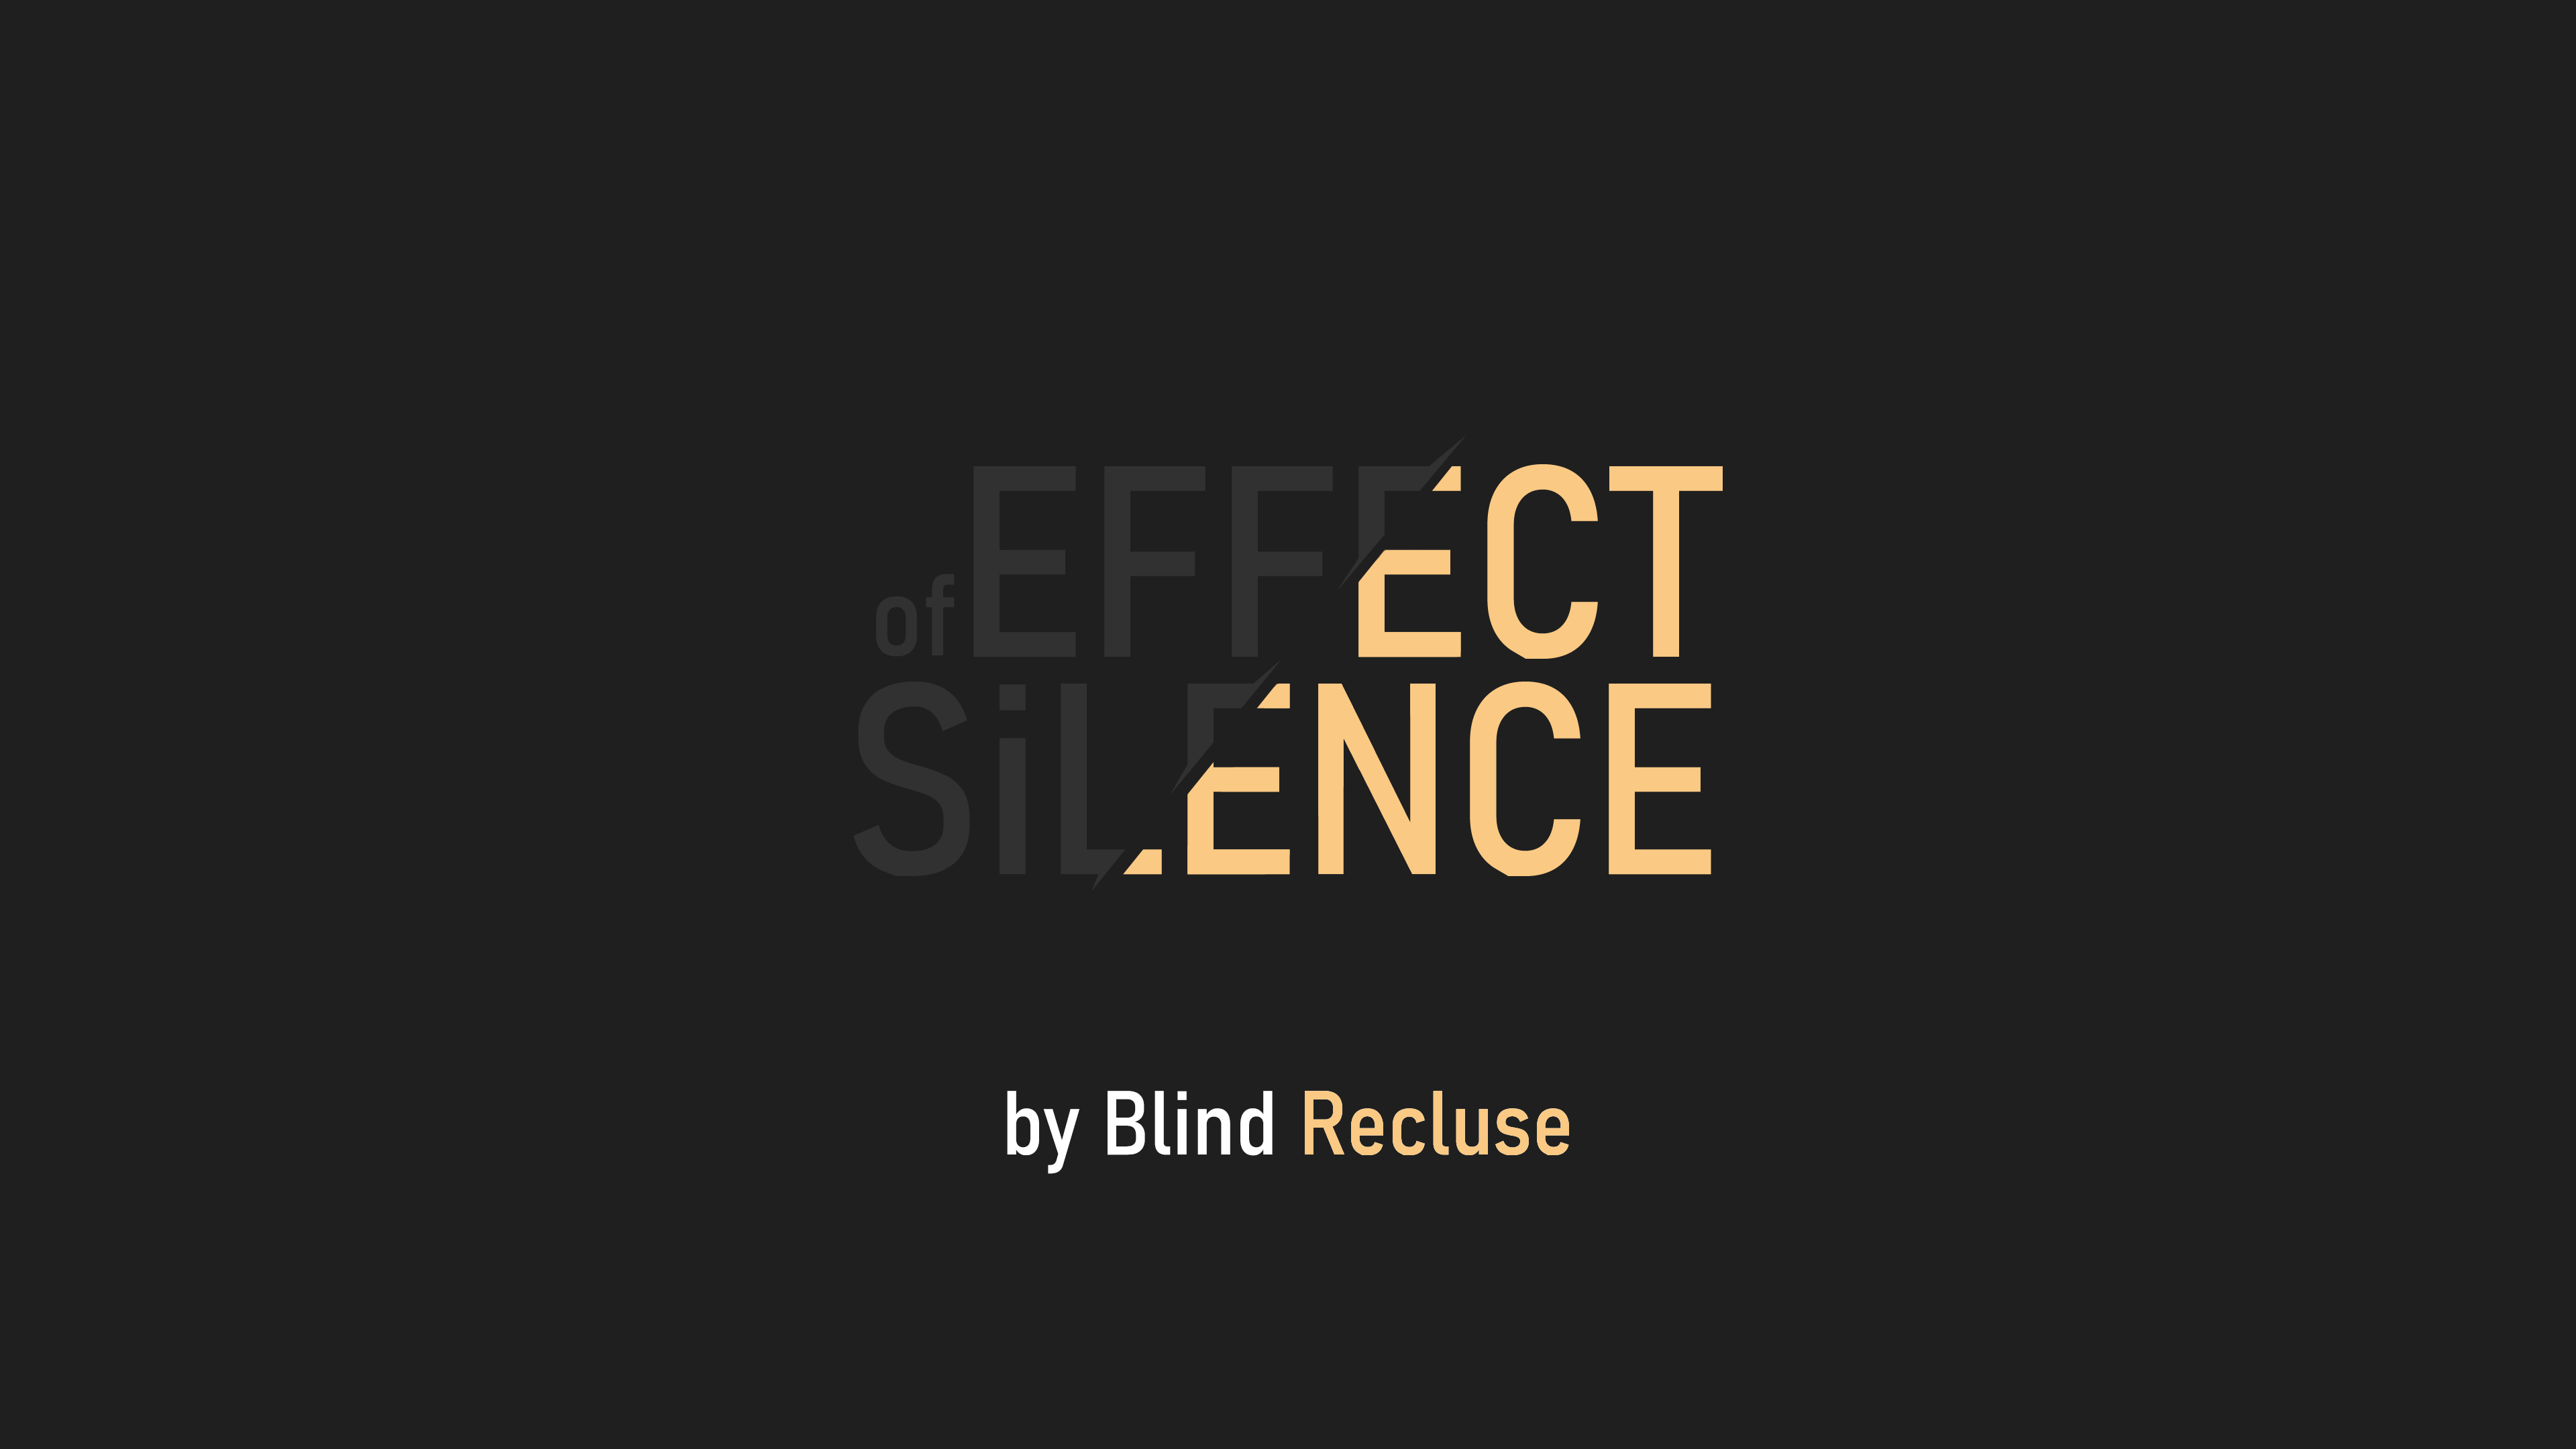 Effect of Silence